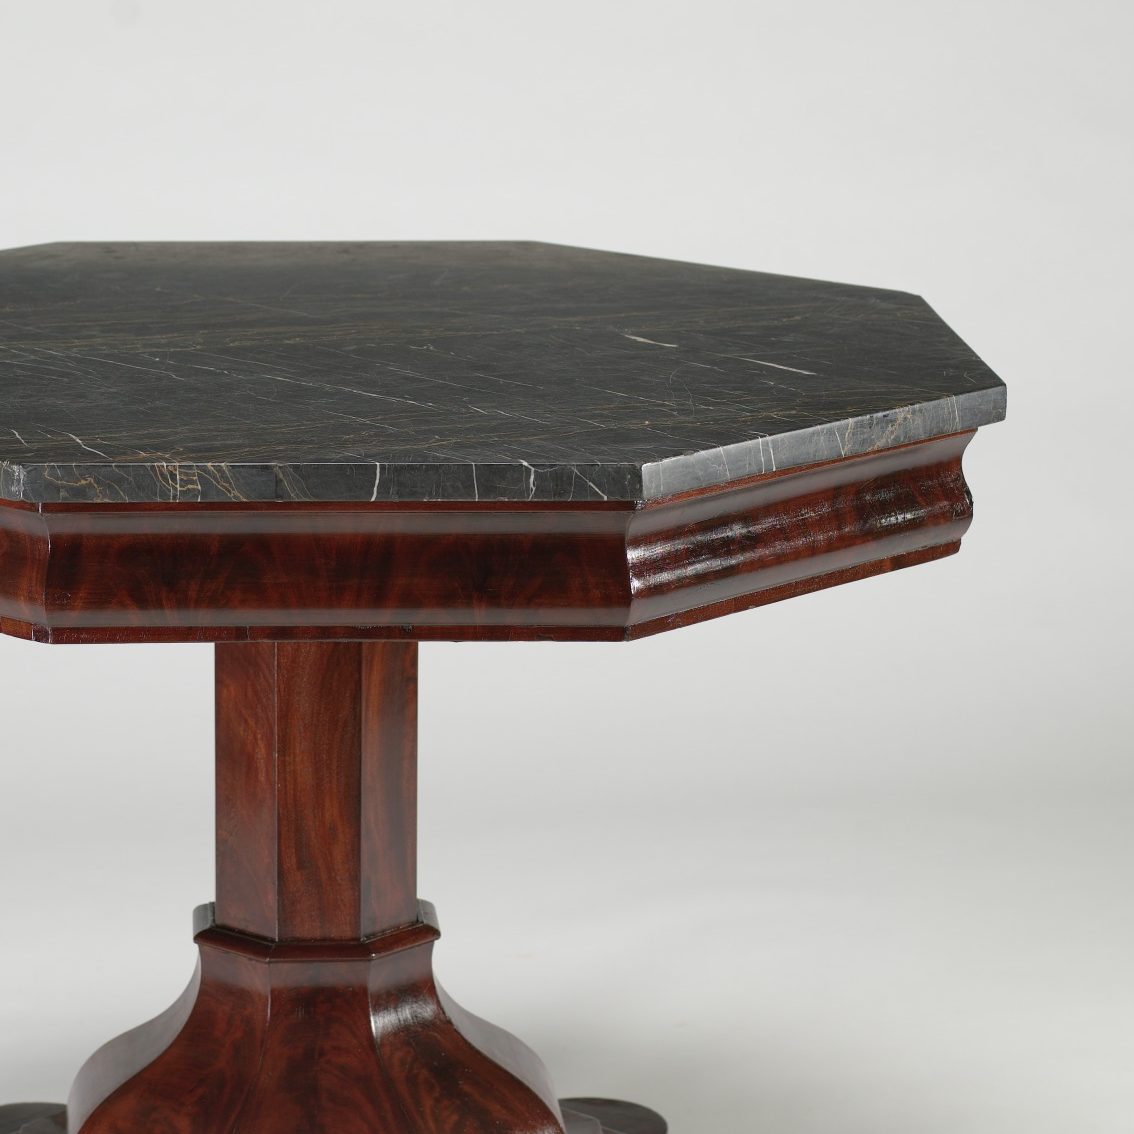 <p>Visit the American Art Galleries on Level 2 to find this Center Table. Experts believe it was made by Thomas Day, an African American cabinetmaker and business owner who was born into a free black family in Virginia in 1801. How many different shapes make up this Center Table?</p>
